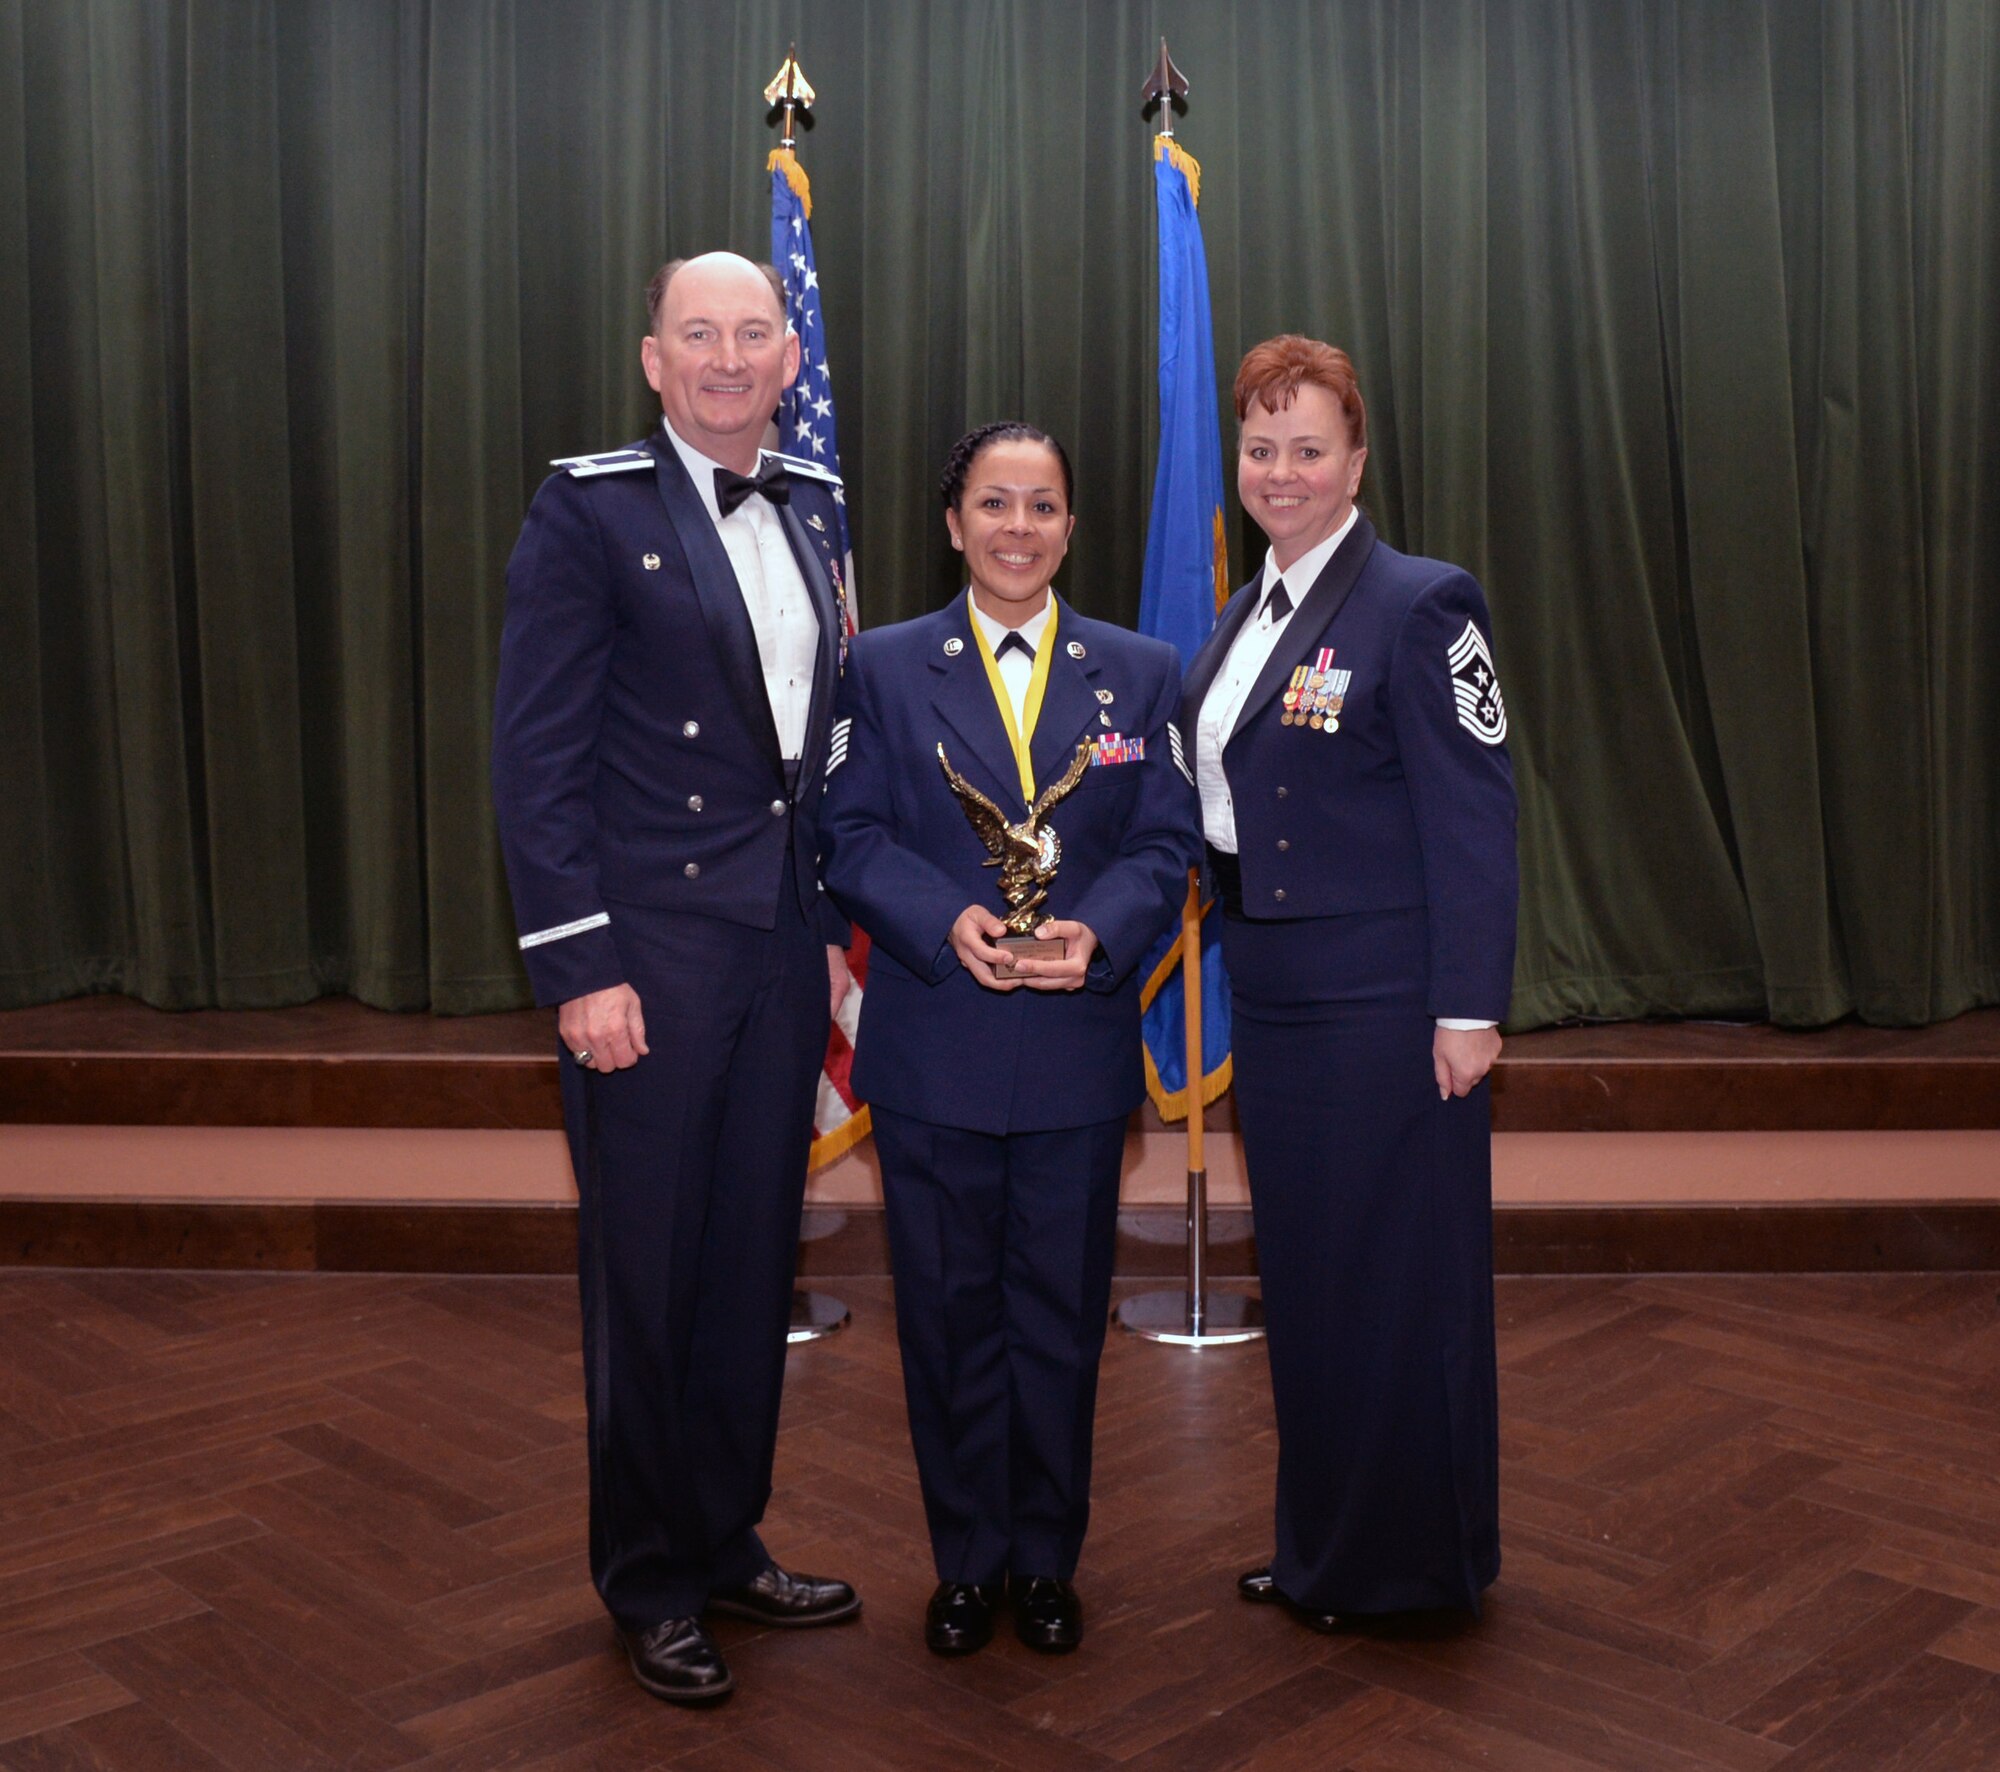 Col. Thomas K. Smith, 433rd Airlift Wing commander, and 433rd AW Command Chief Master Sgt. Shana C. Cullum, award Stephanie Sanchez, 433rd AW Safety Office, as the Civilian Category II of the Year at the 433rd AW annual awards banquet at Joint Base San Antonio-Lackland, Texas Feb. 9, 2019.